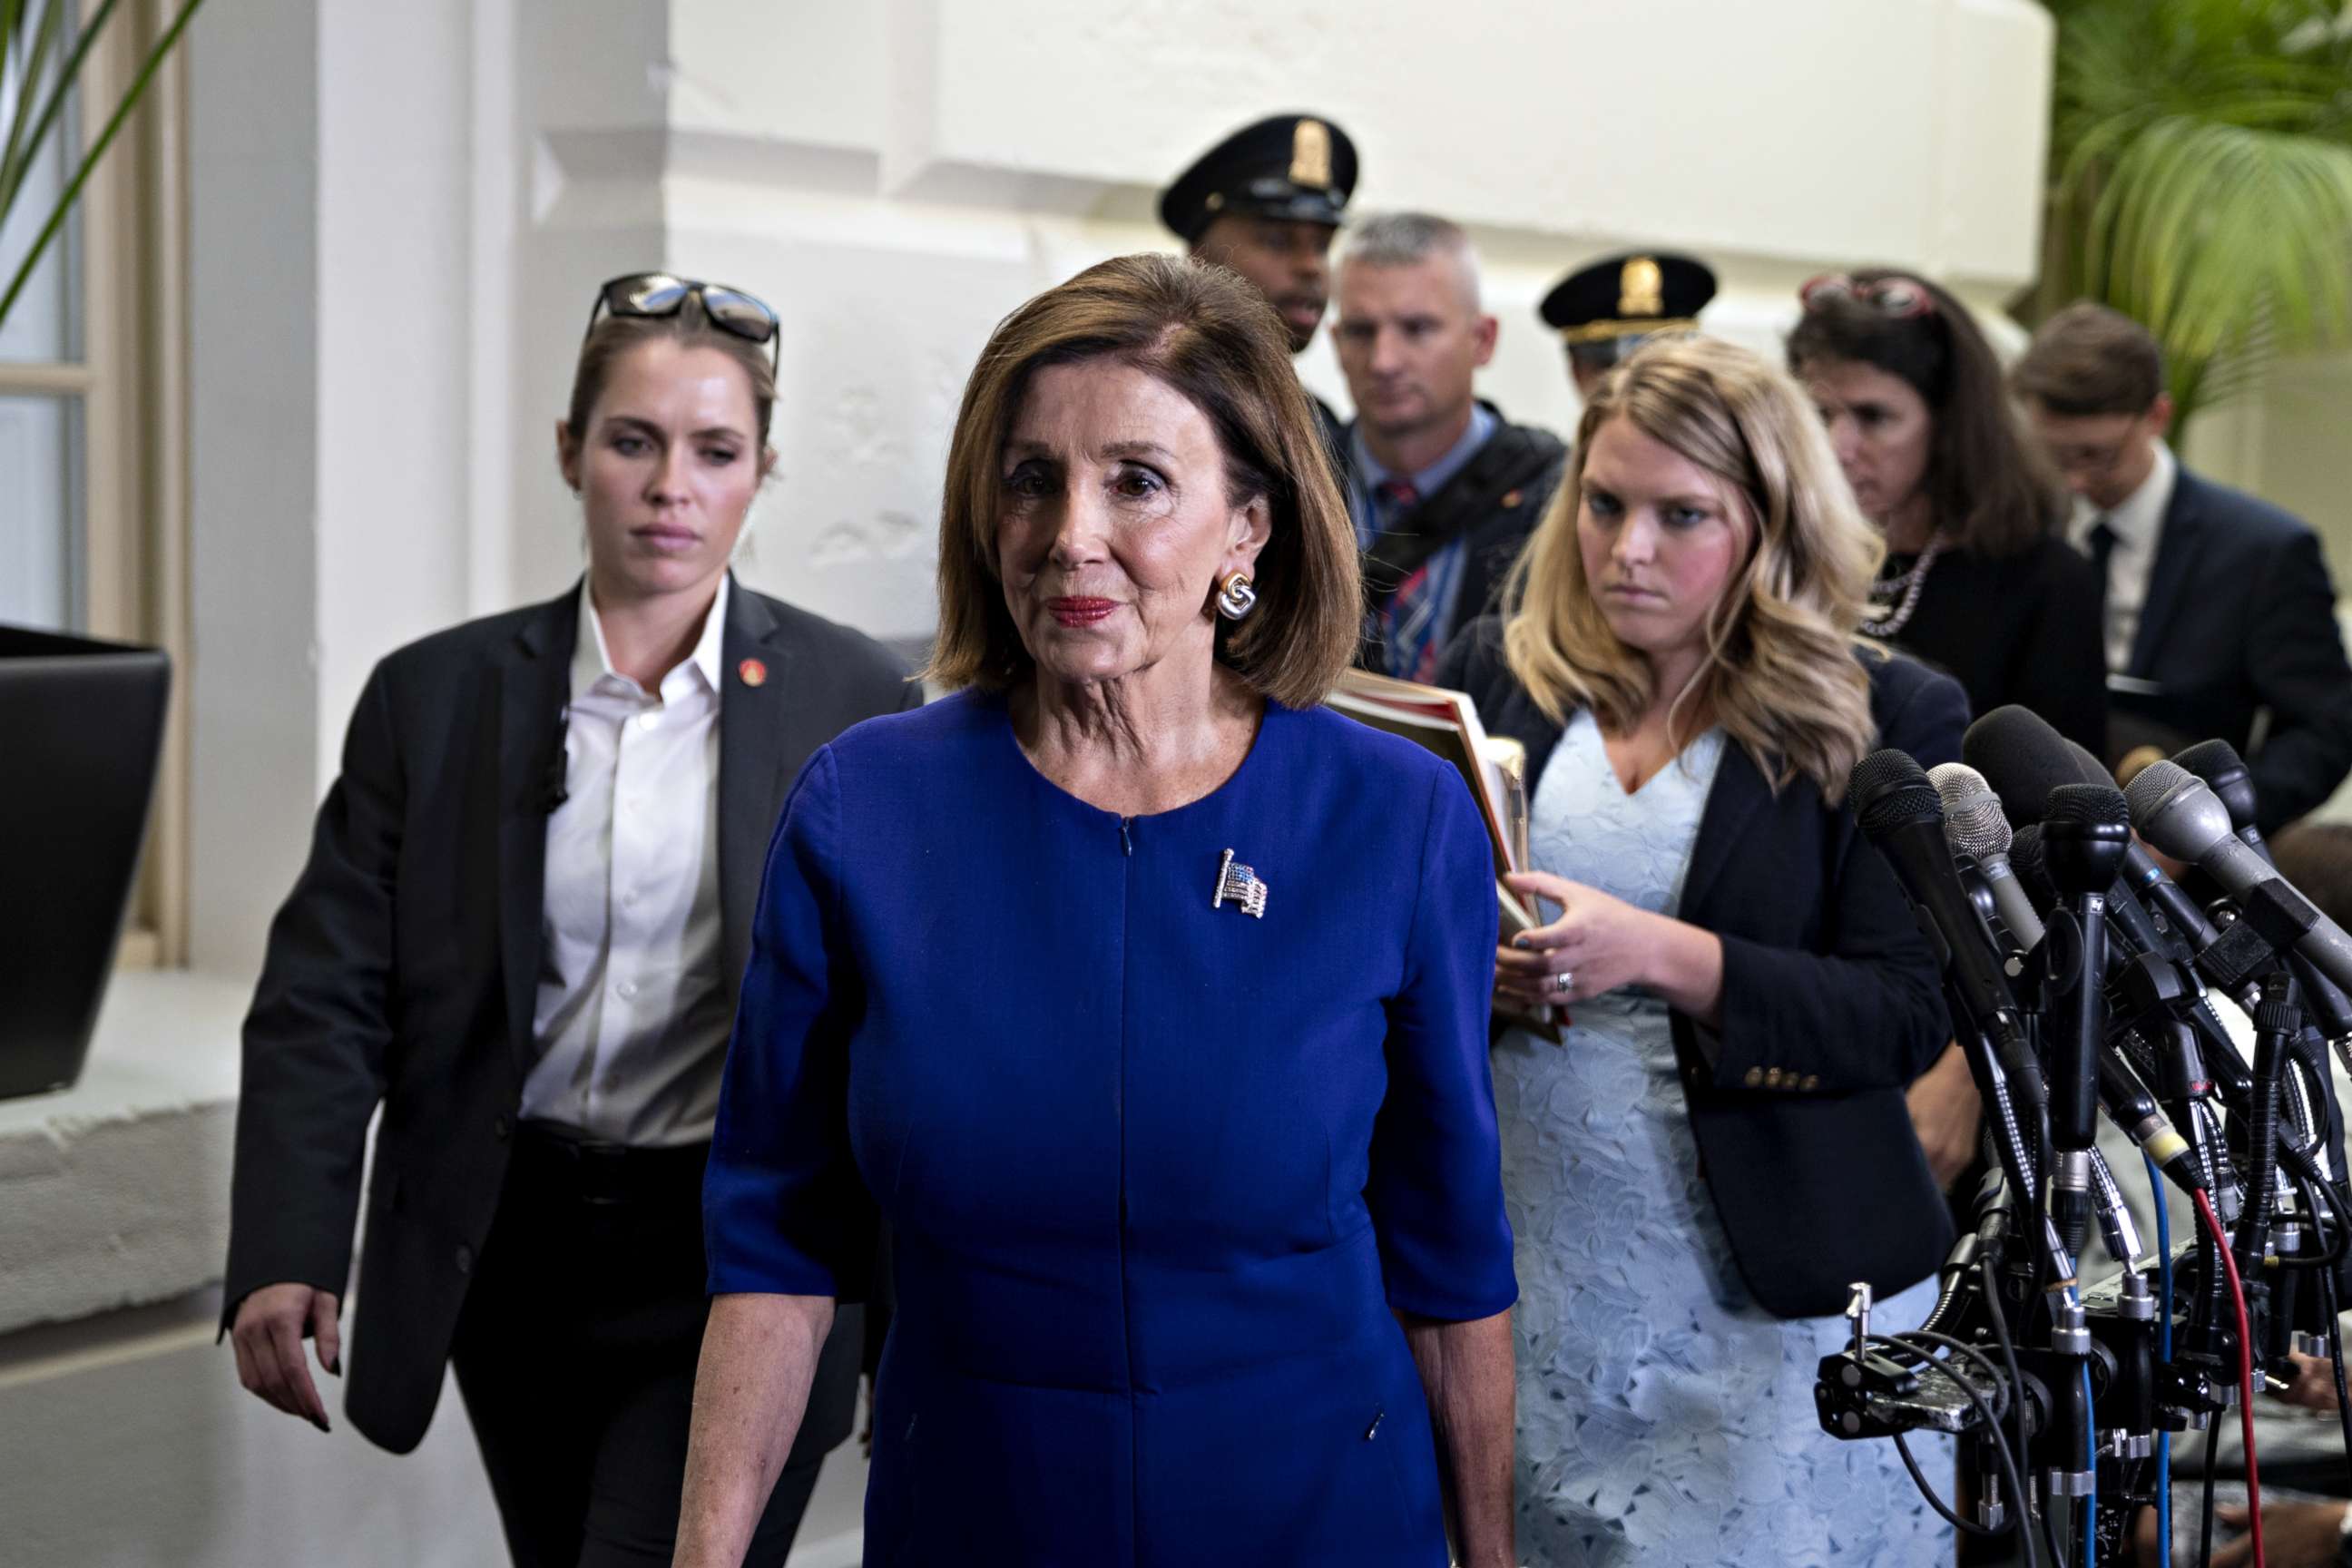 PHOTO: U.S. House Speaker Nancy Pelosi, a Democrat from California, exits a Democratic caucus meeting at the U.S. Capitol in Washington, D.C., U.S., on Tuesday, Sept. 24, 2019.